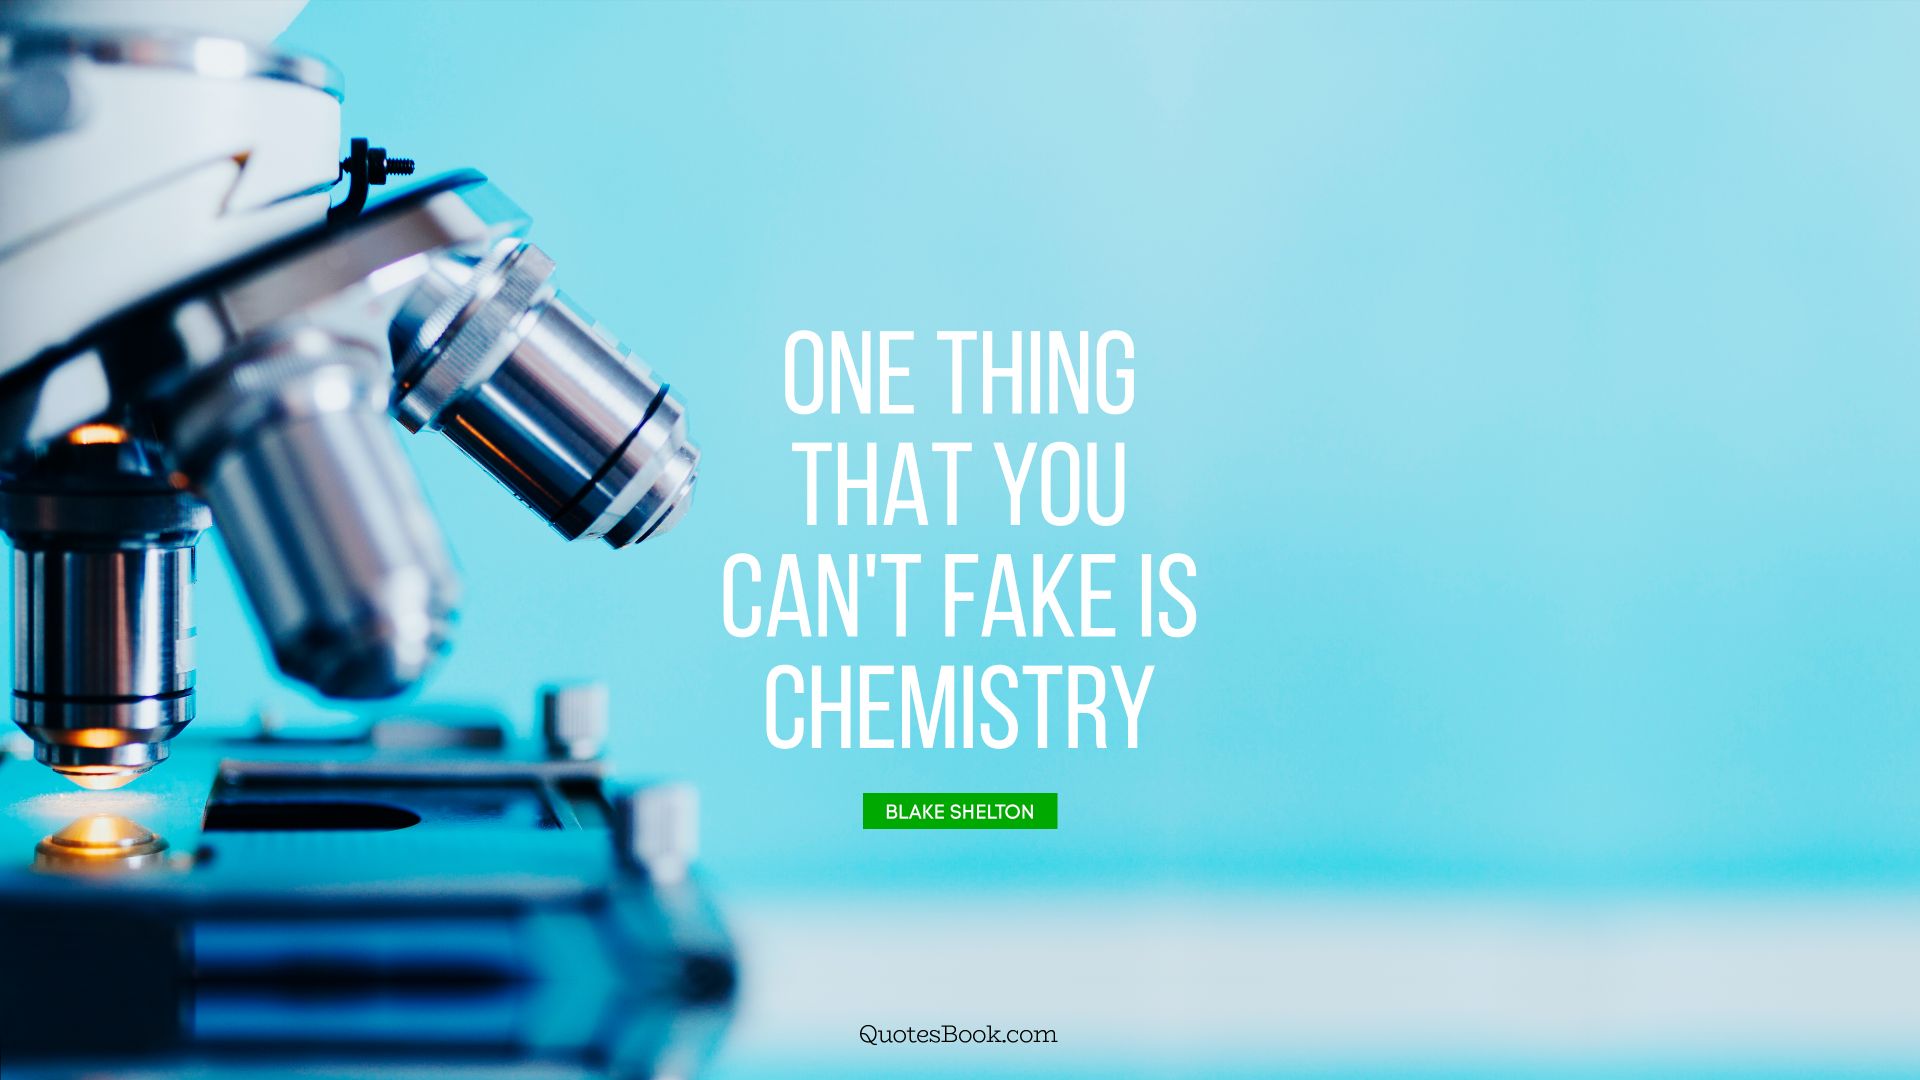 One thing that you can't fake is chemistry. - Quote by Blake Shelton